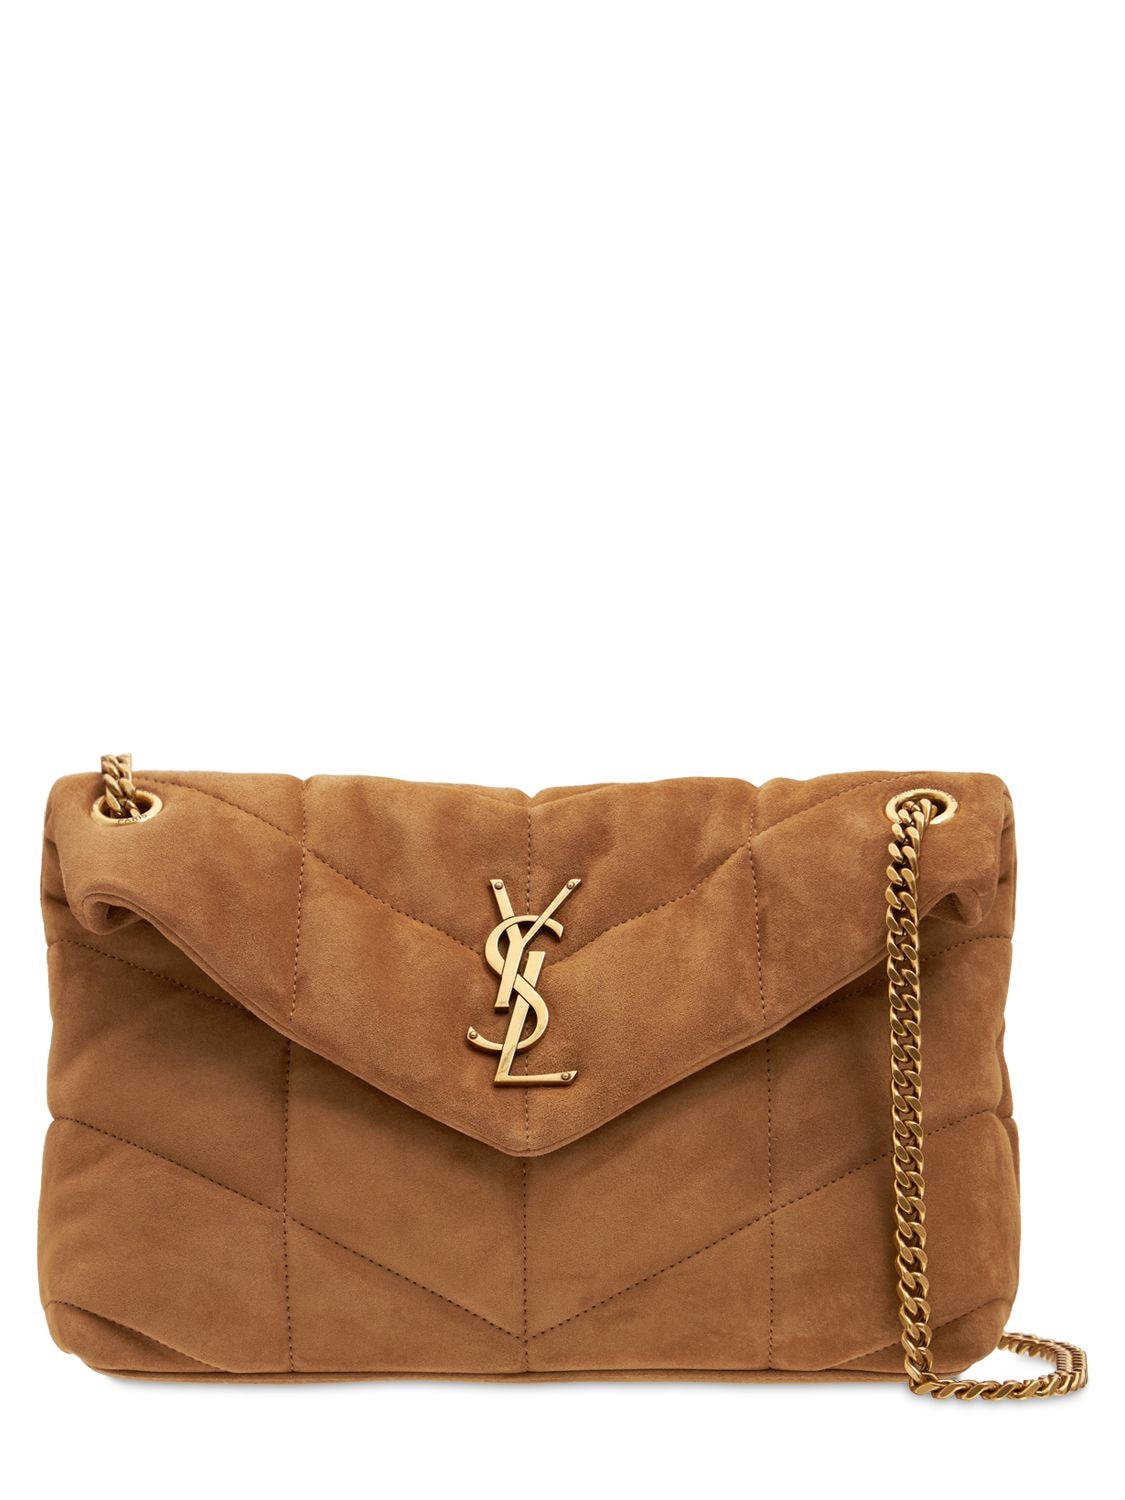 Image of Small Loulou Suede Shoulder Bag